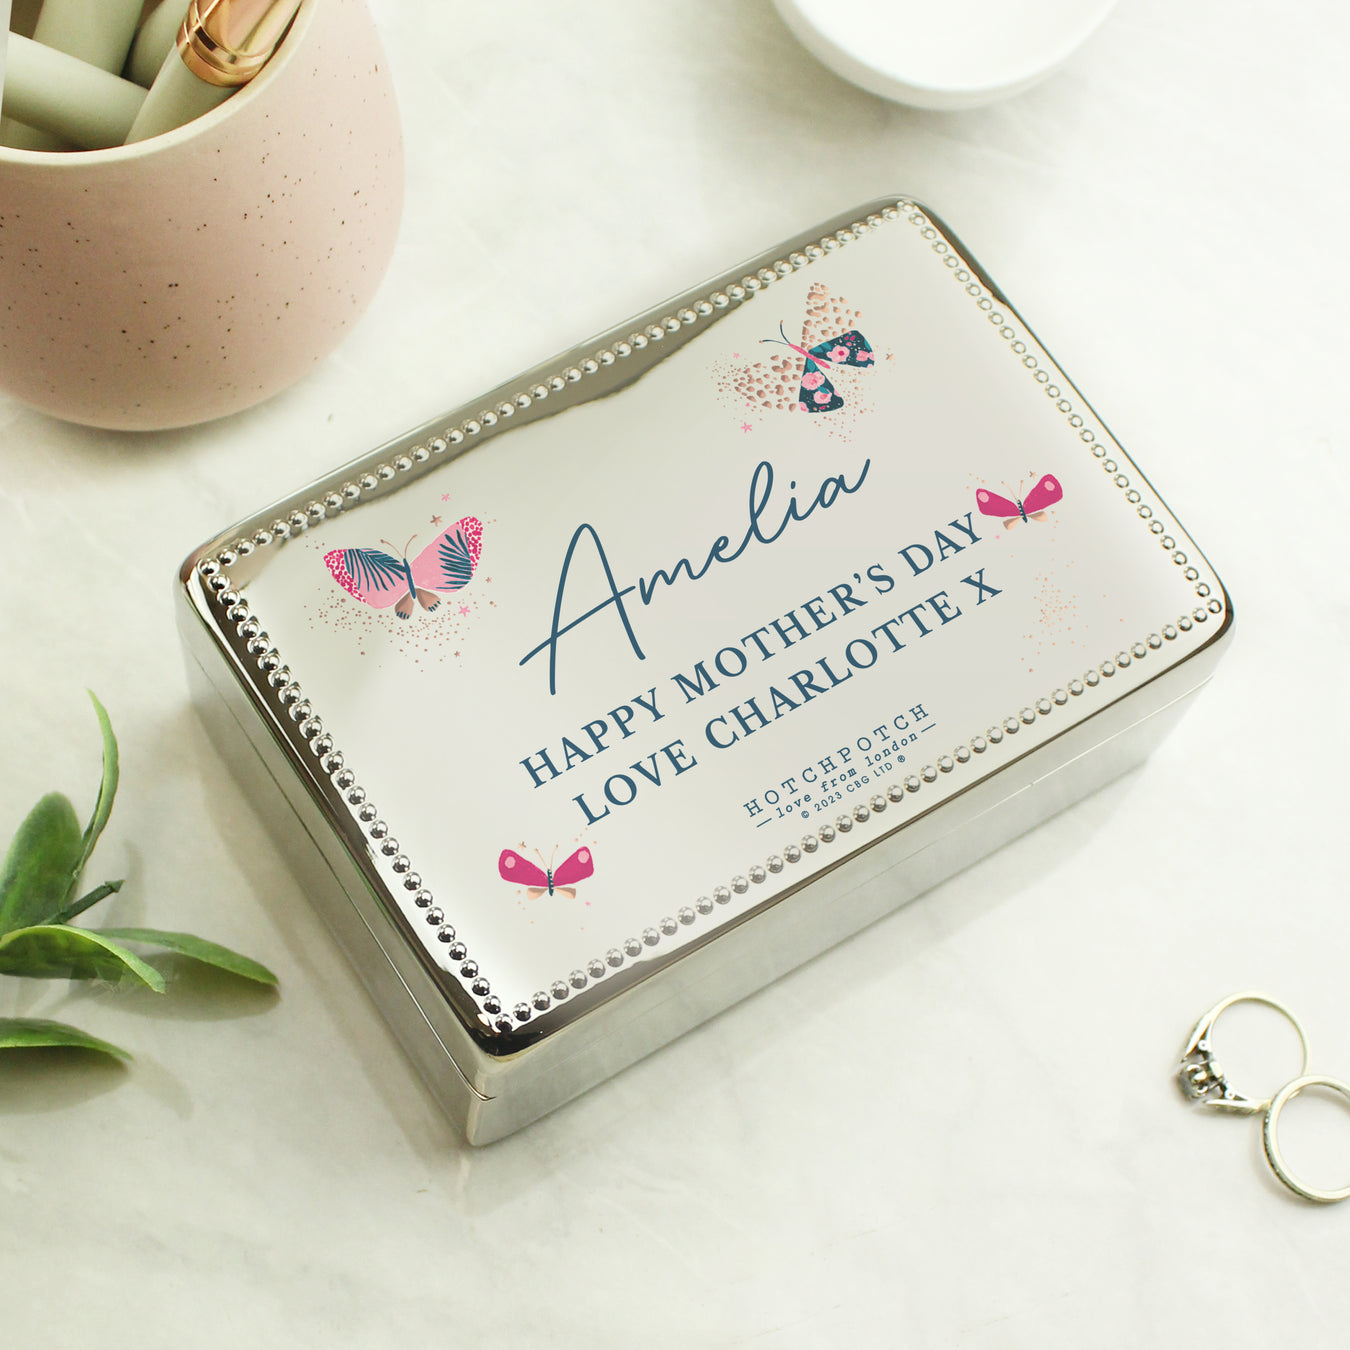 Personalised Jewellery Boxes